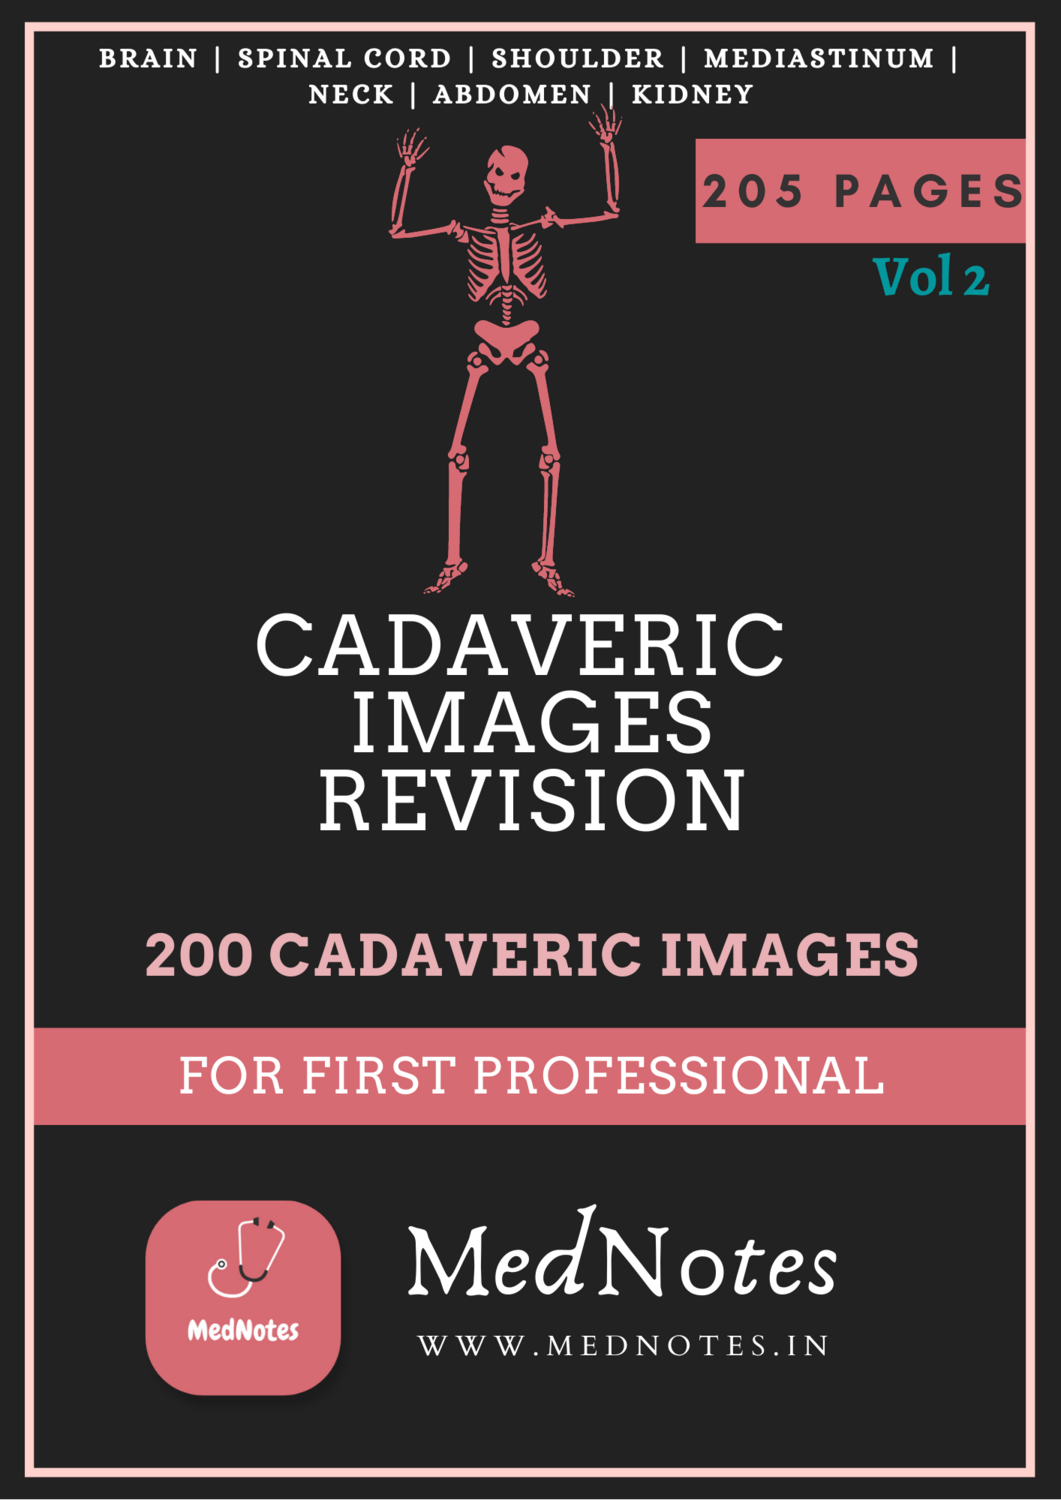 Cadaveric Images Revision (Vol 2) - For First Professional [E book]